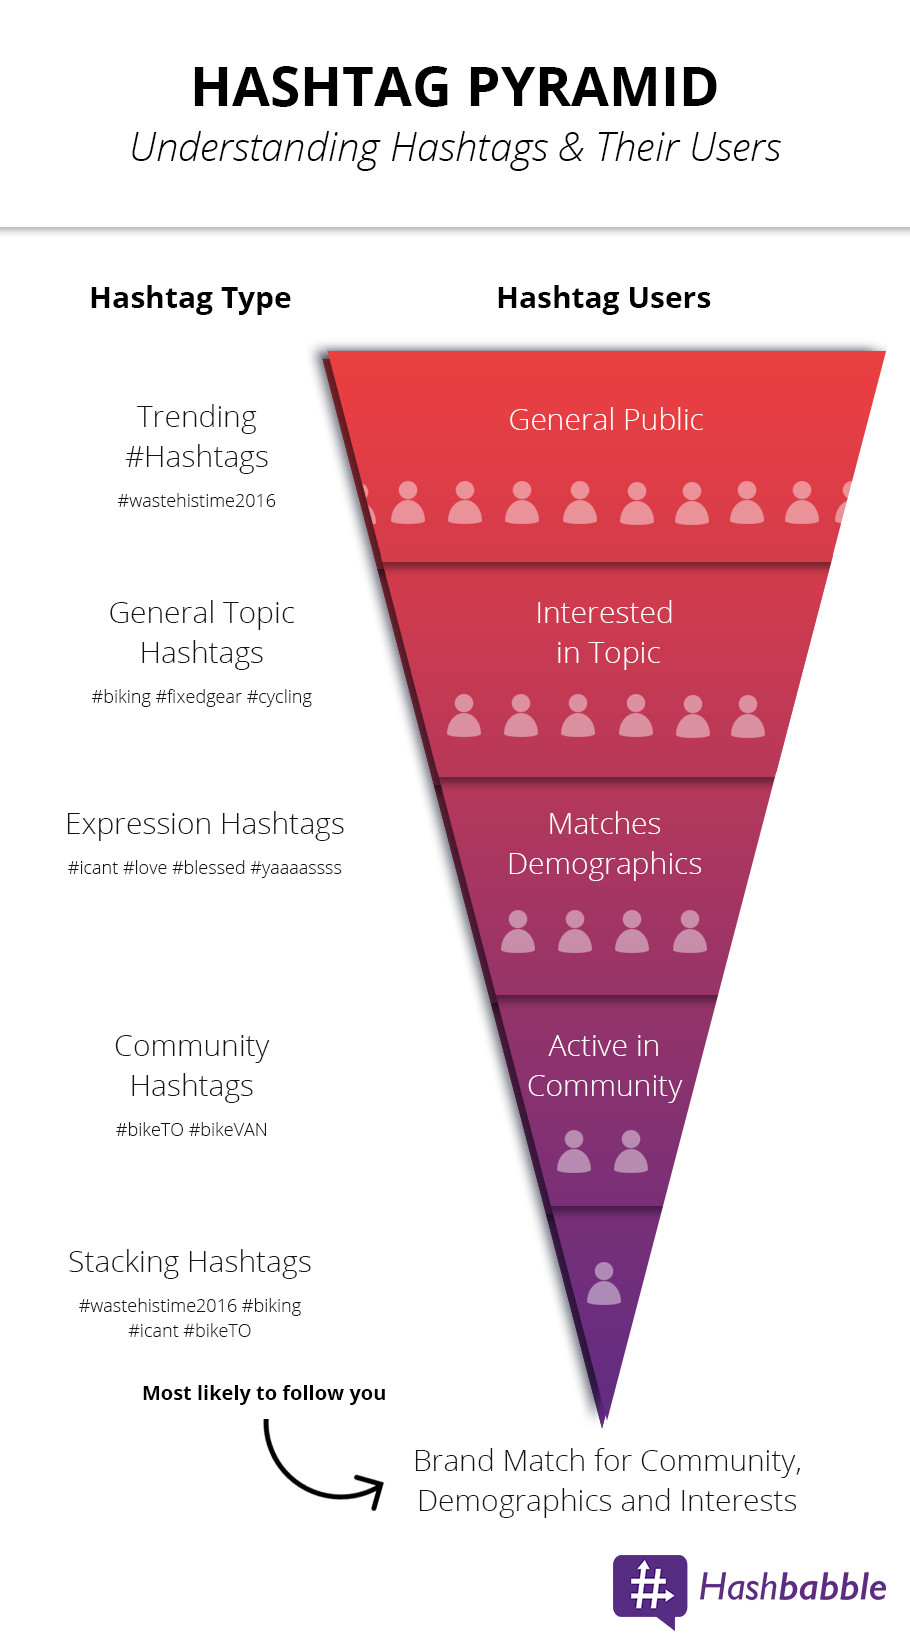 Hashtag Pyramid. Trending Hashtags link you to a general audience. Generic topic hash tags connect you to an audience interested in a specific topic. Expression hash tags connect you to a specific age range. Community hashtags connect you to people who are very active in the community. With each level, the audience gets smaller and more engaged.  